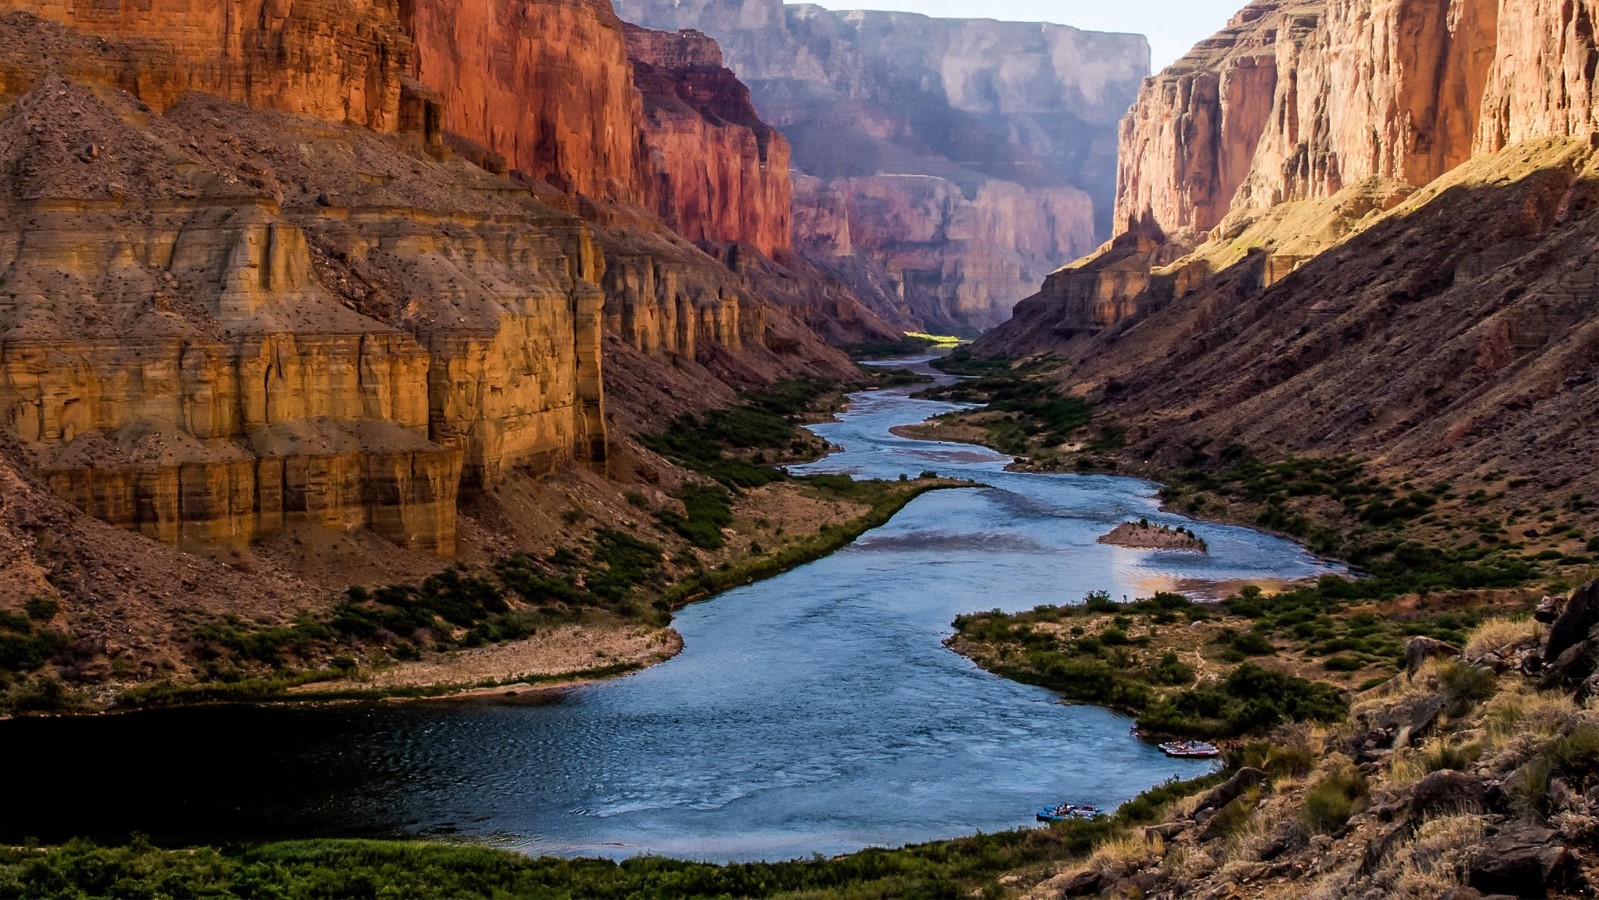 Over-allocated: The story of the Colorado River